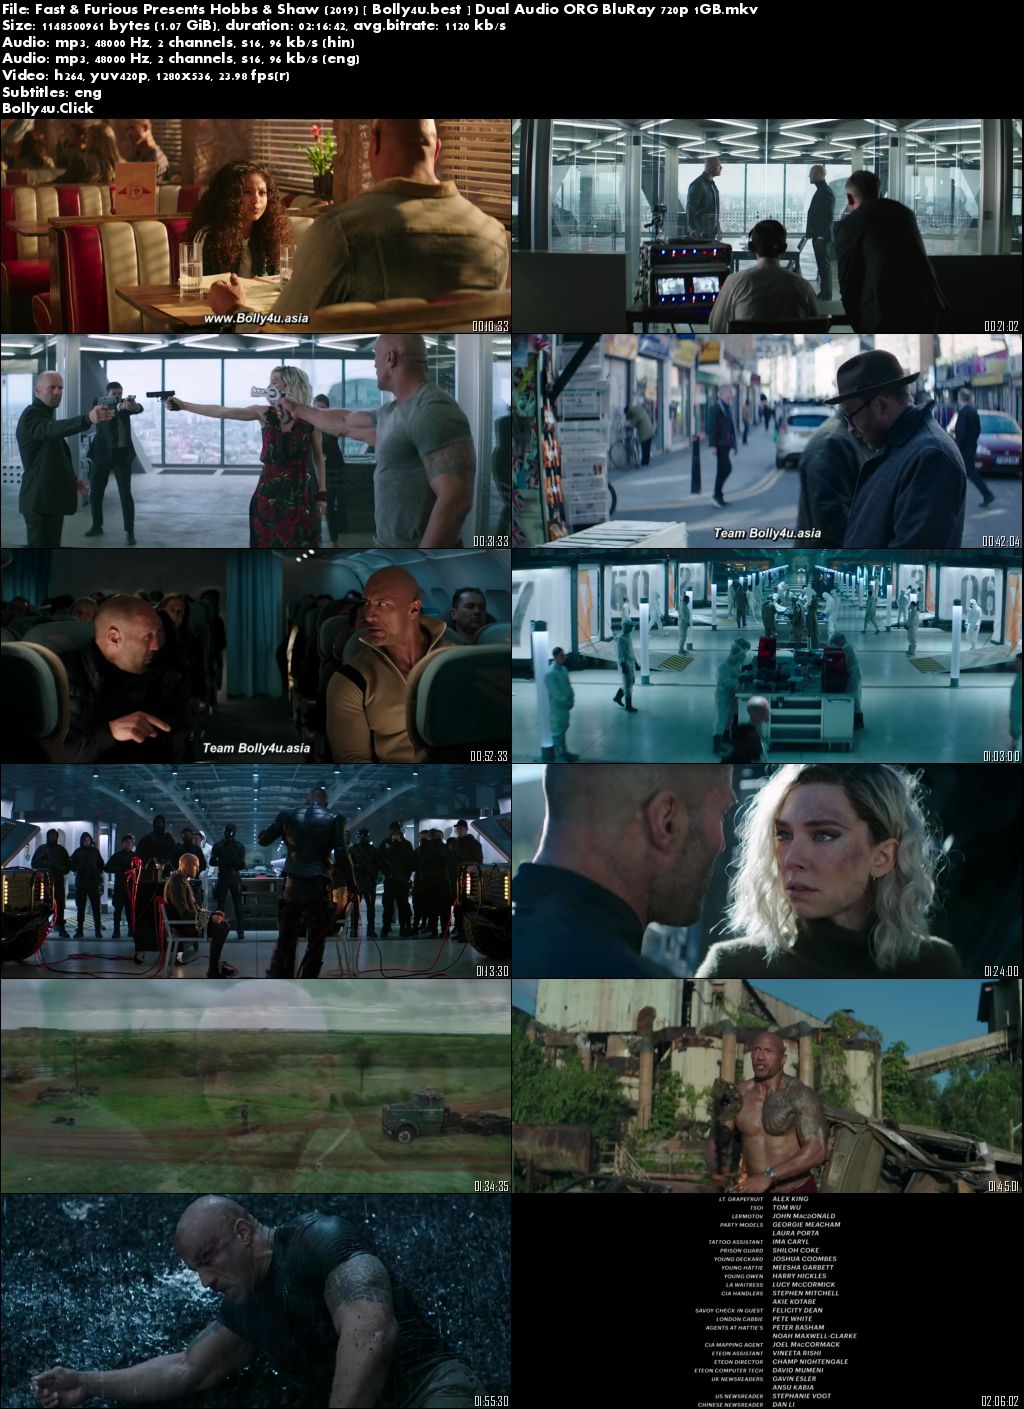 Fast And Furious Presents Hobbs And Shaw 2019 BRRip 1GB Hindi Dual Audio ORG 720p Download